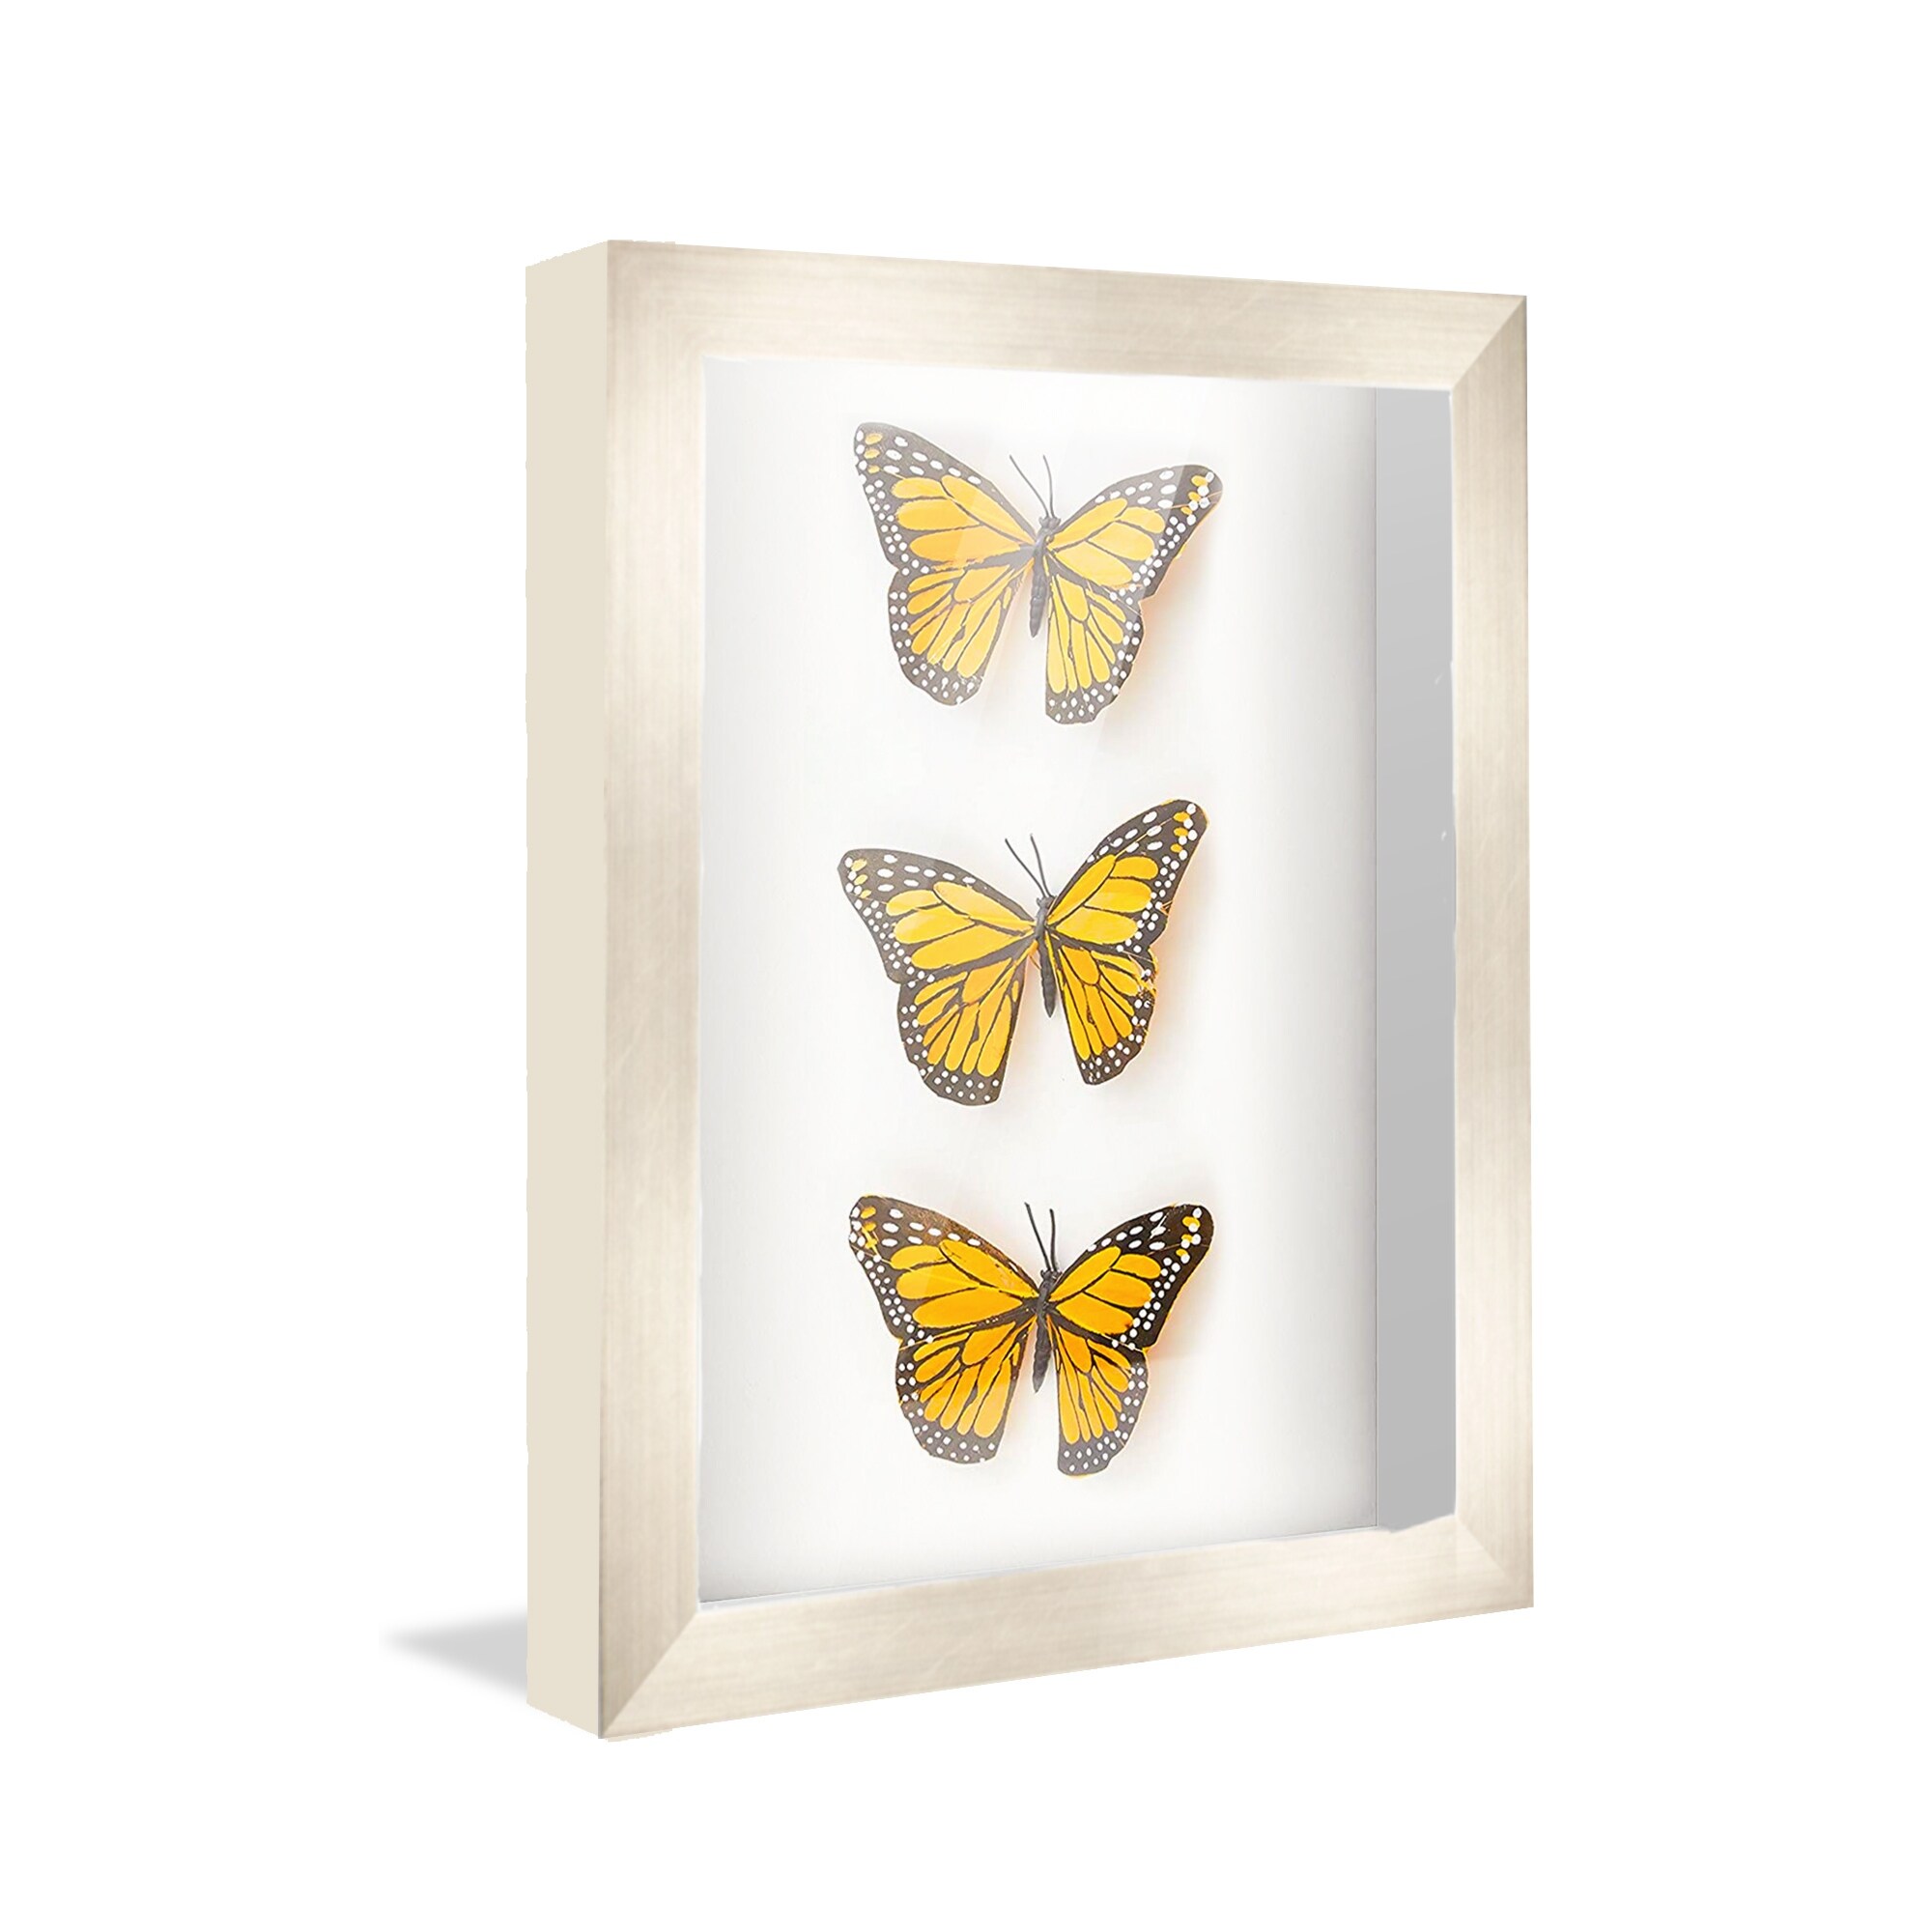 8x8 Shadow Box Frame Light Real Wood with a Silver Acid-Free Backing | 3/4  of Usuable Depth | UV